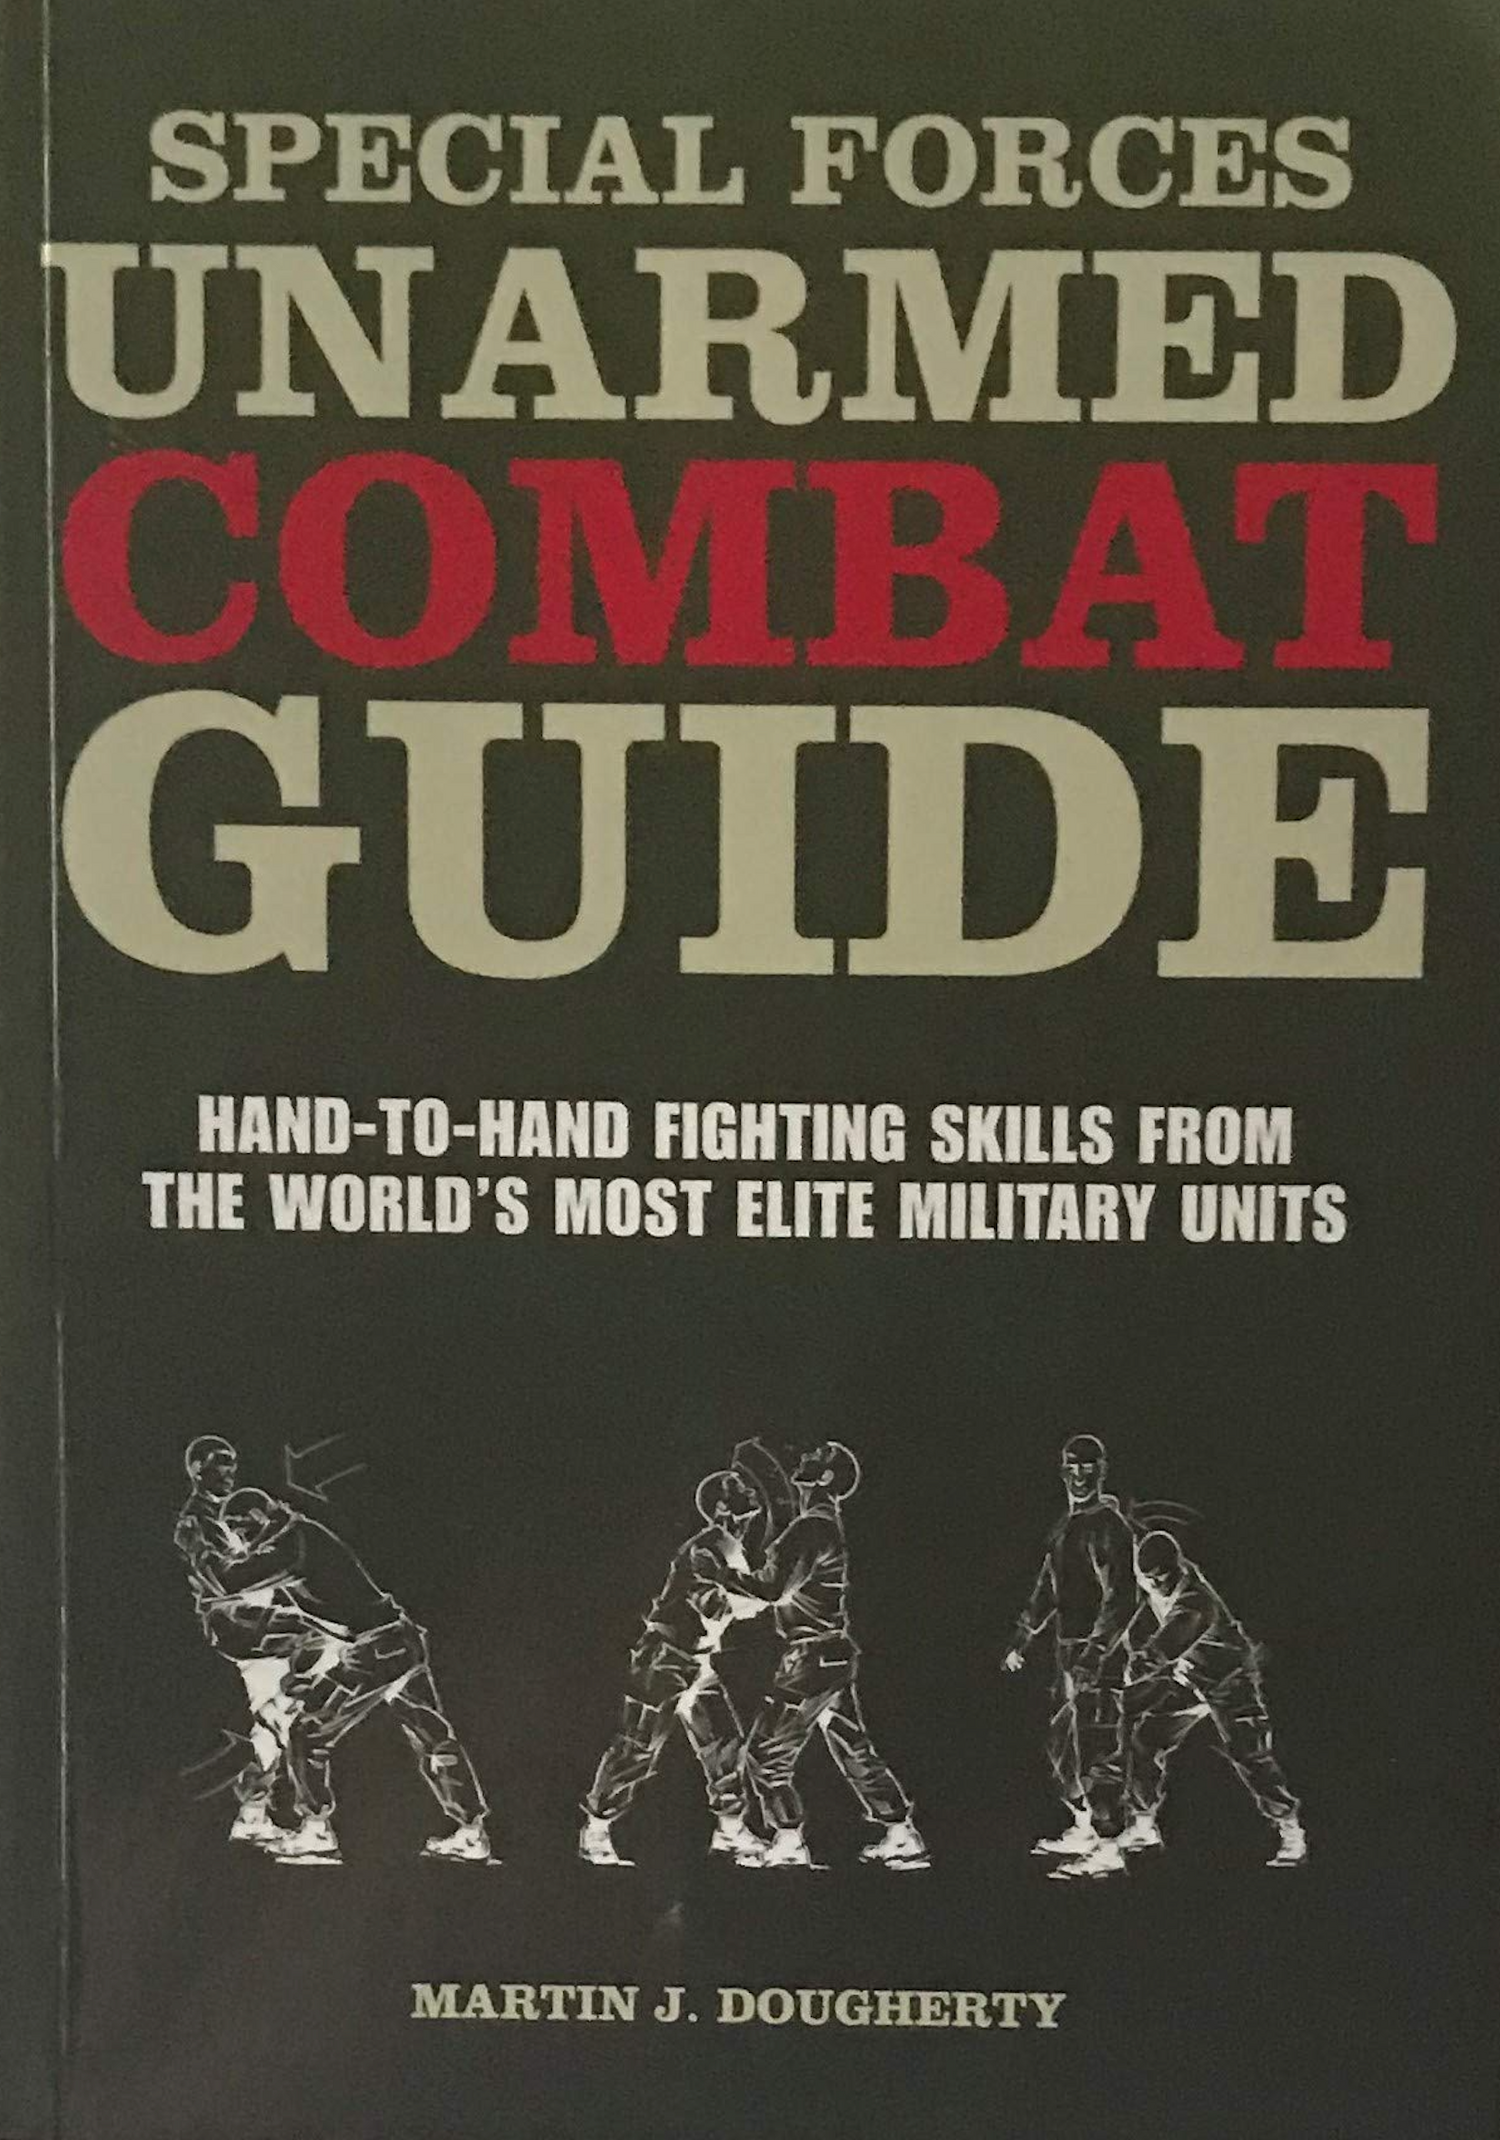 Special Forces Unarmed Combat Guide: Hand-to-Hand Fighting Skills From The World's Most Elite Military Units Book by Martin Dougherty (Preowned) - Budovideos Inc